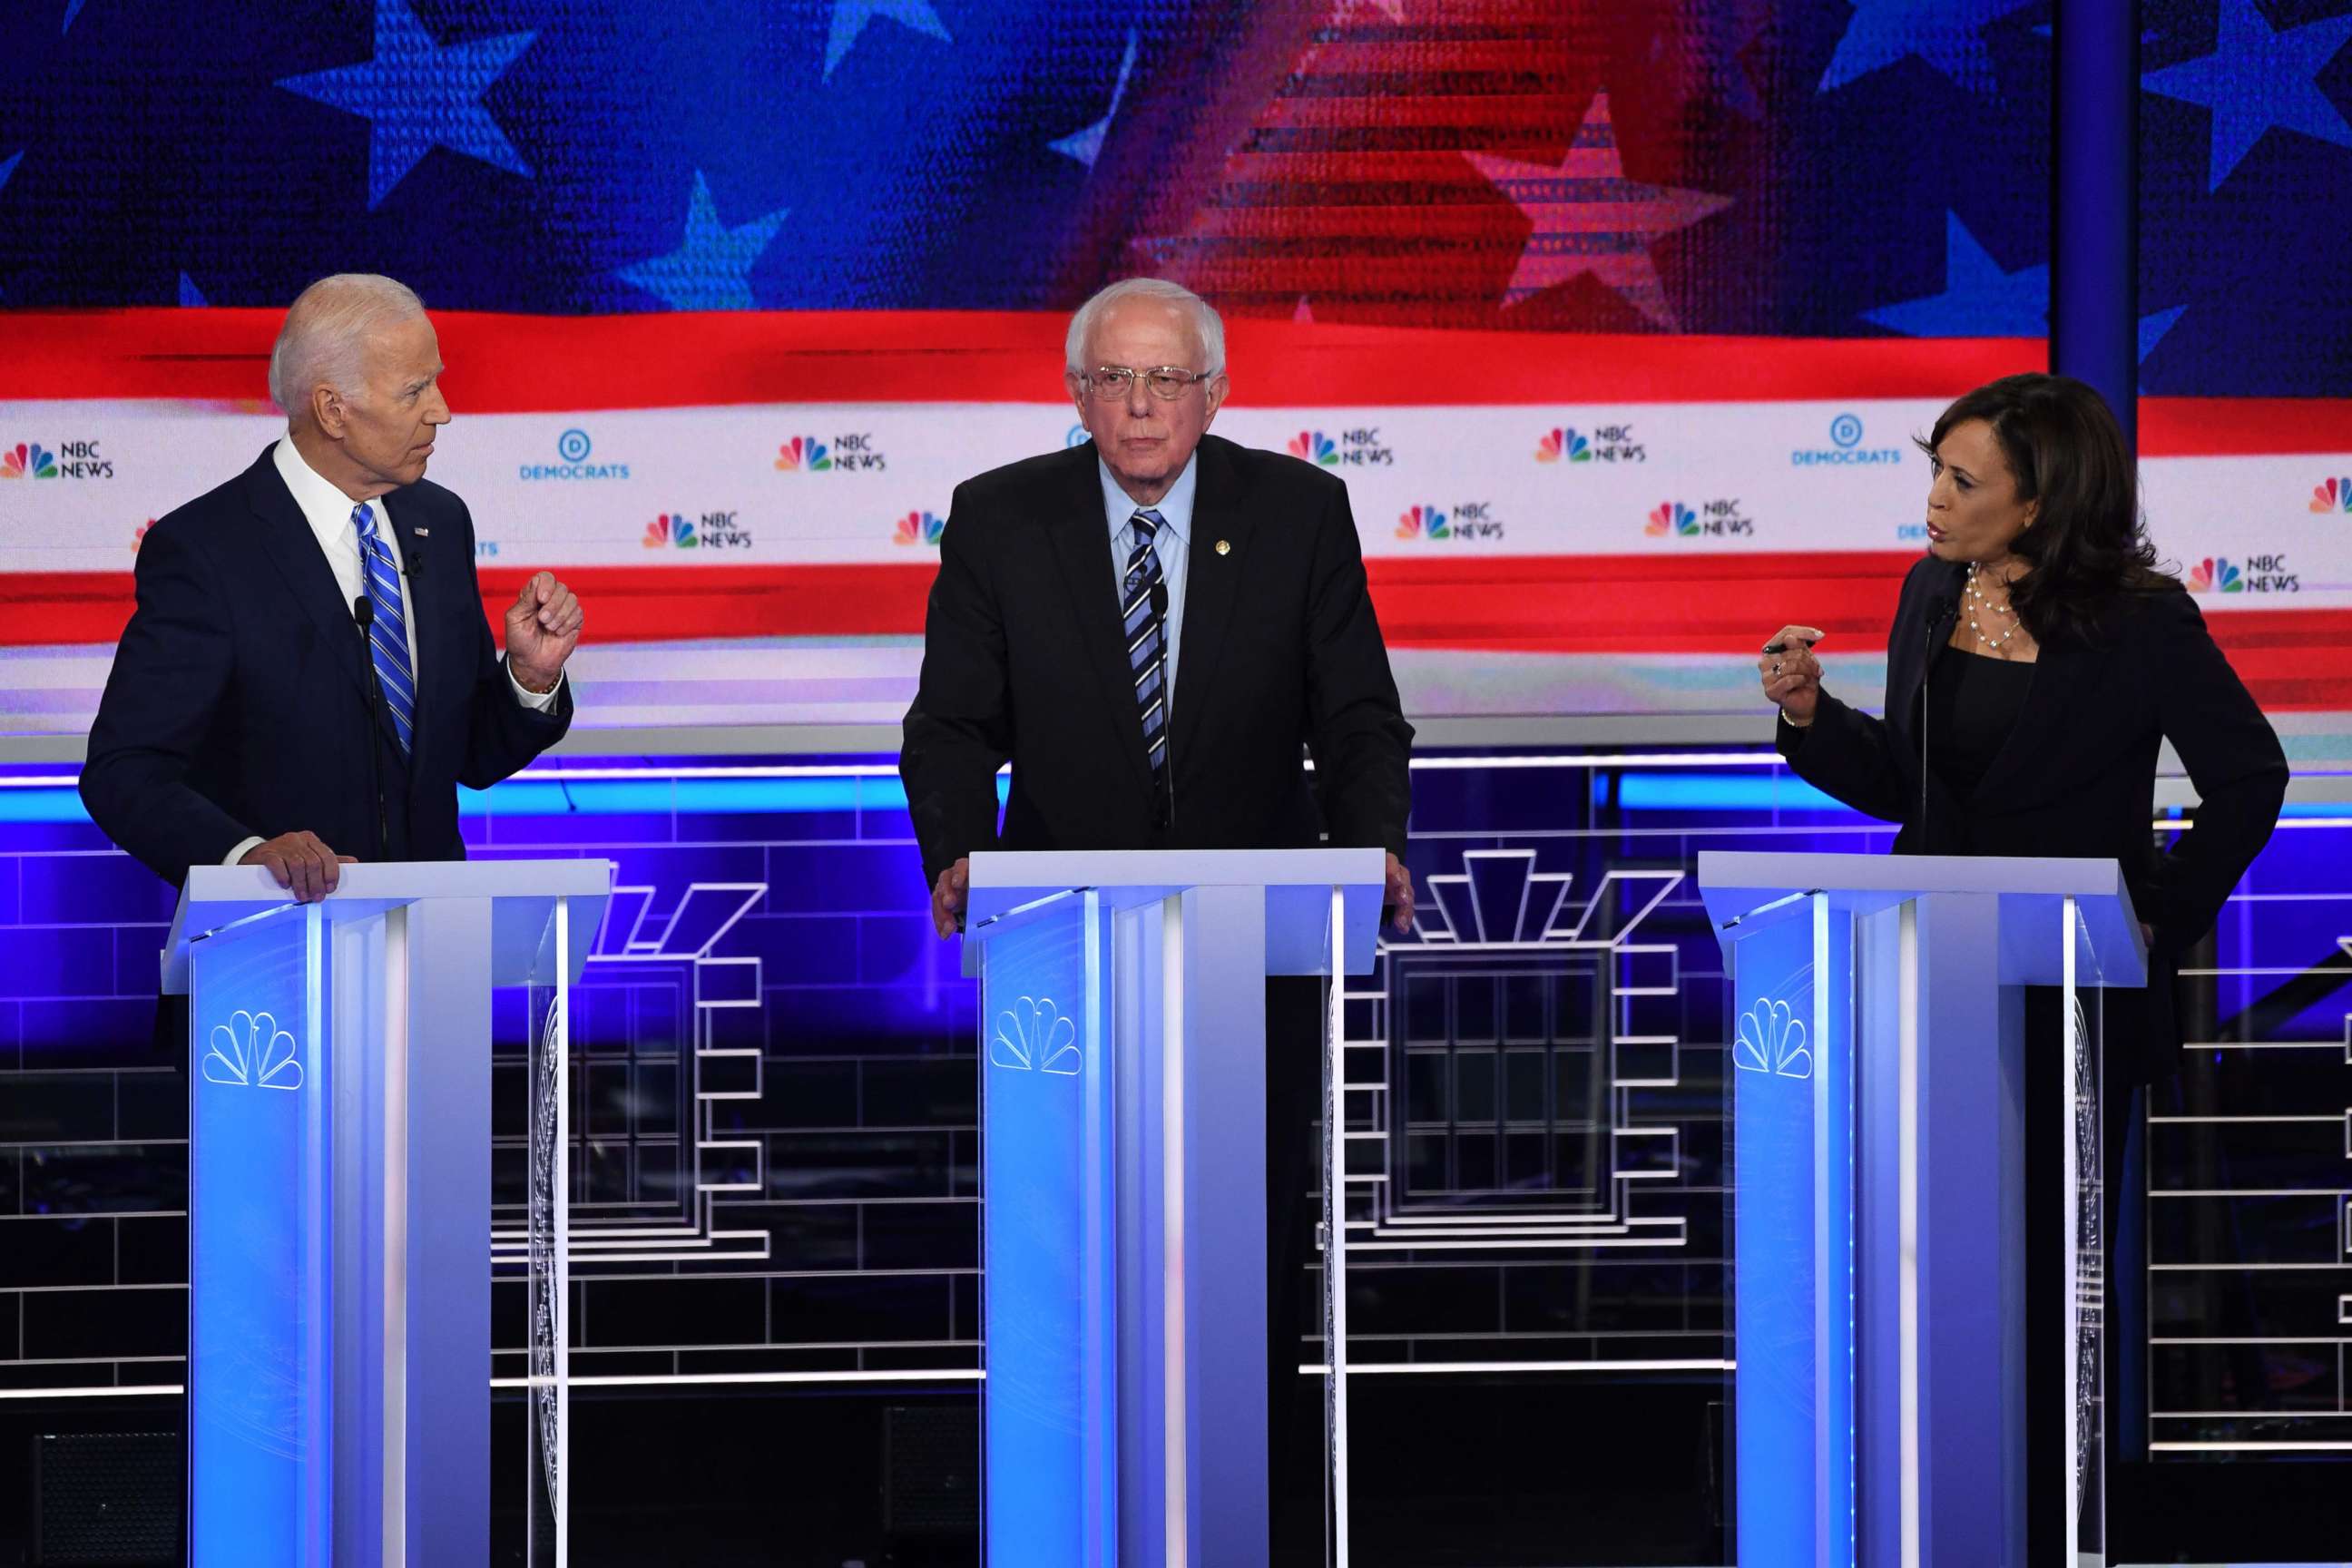 PHOTO: Joe Biden, Bernie Sanders and Kamala Harris participate in the second night of the first 2020 democratic presidential debate at the Adrienne Arsht Center for the Performing Arts in Miami, June 27, 2019.